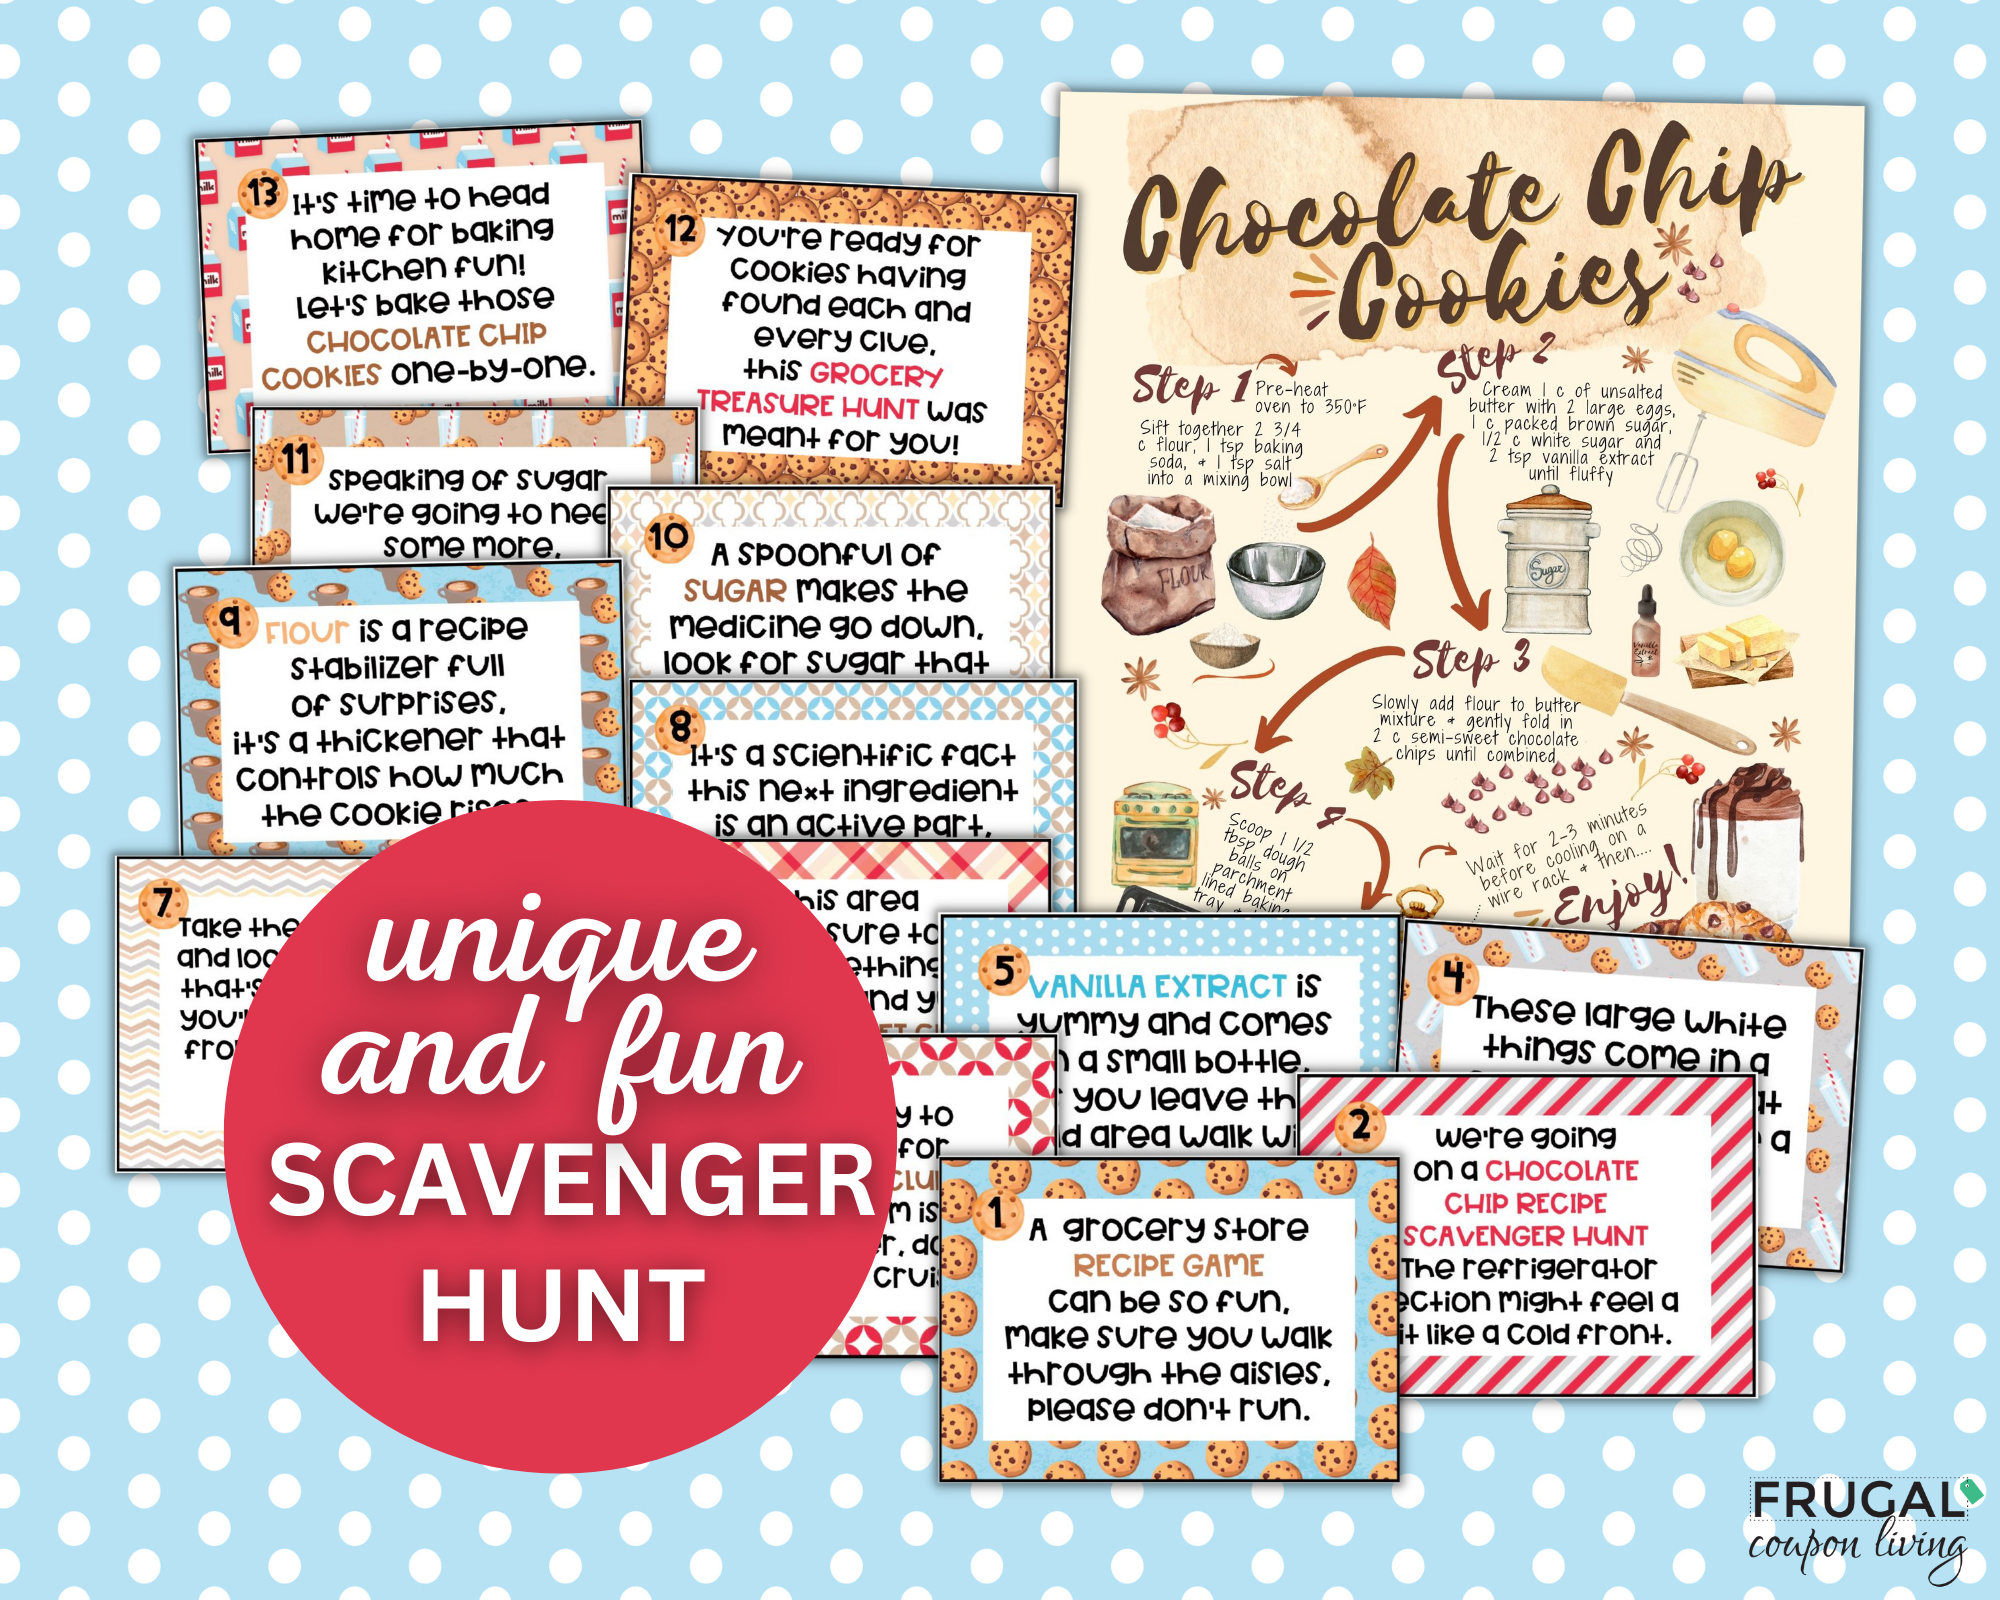 Grocery Store Treasure Hunt Clue Cards + Chocolate Chip Cookie Recipe –  Frugal Coupon Living